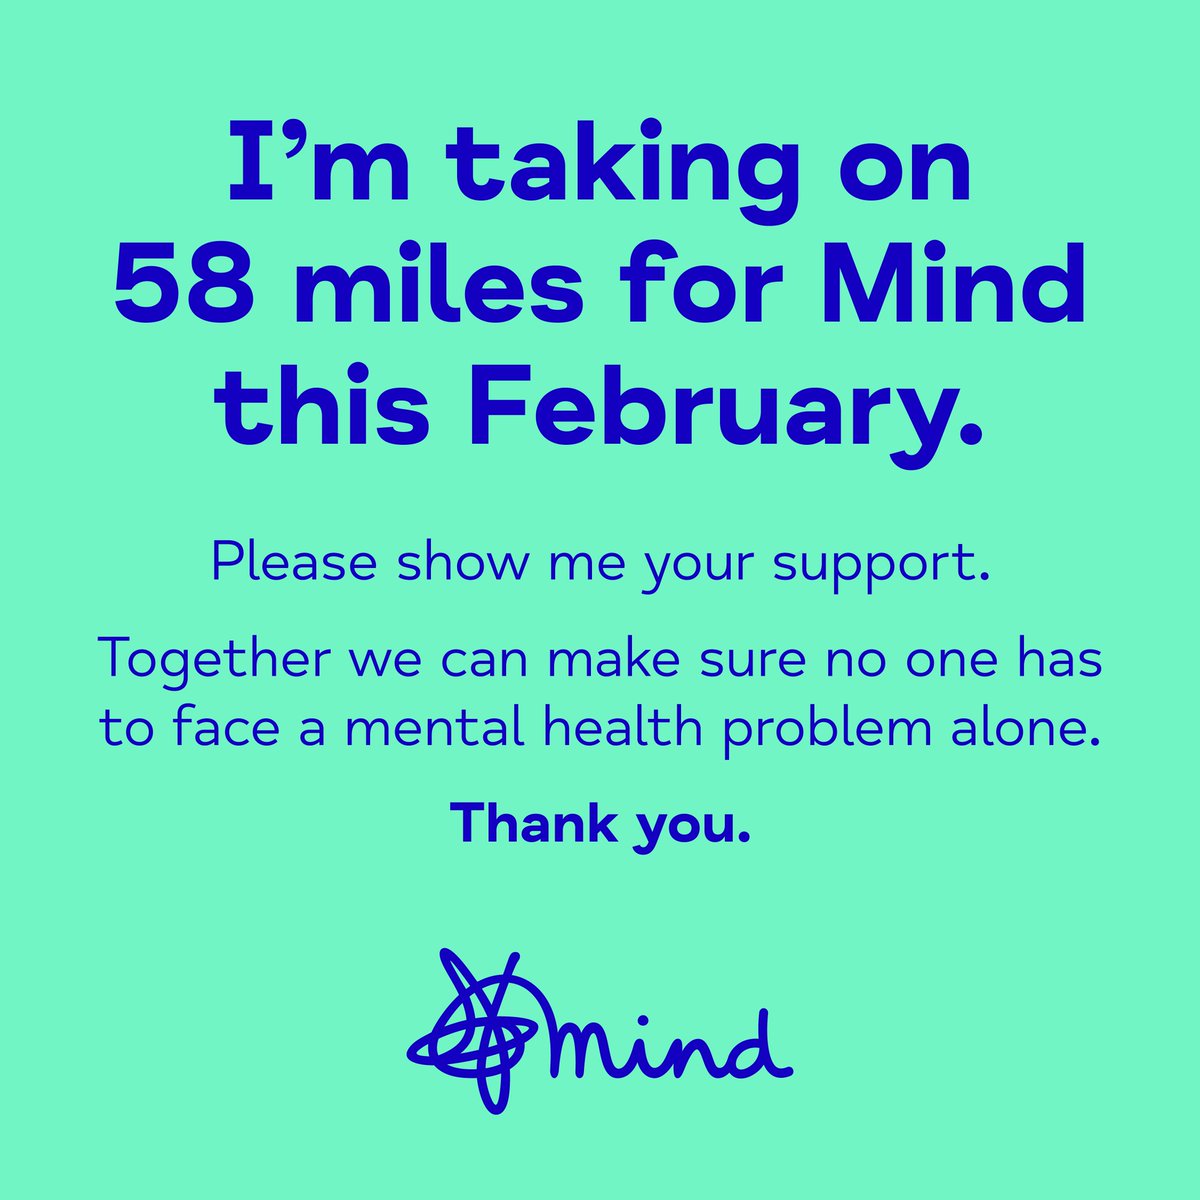 I'm fundraising for Mind. Check out my @JustGiving page and please donate if you can. Thank you! #JustGiving justgiving.com/fundraising/al…